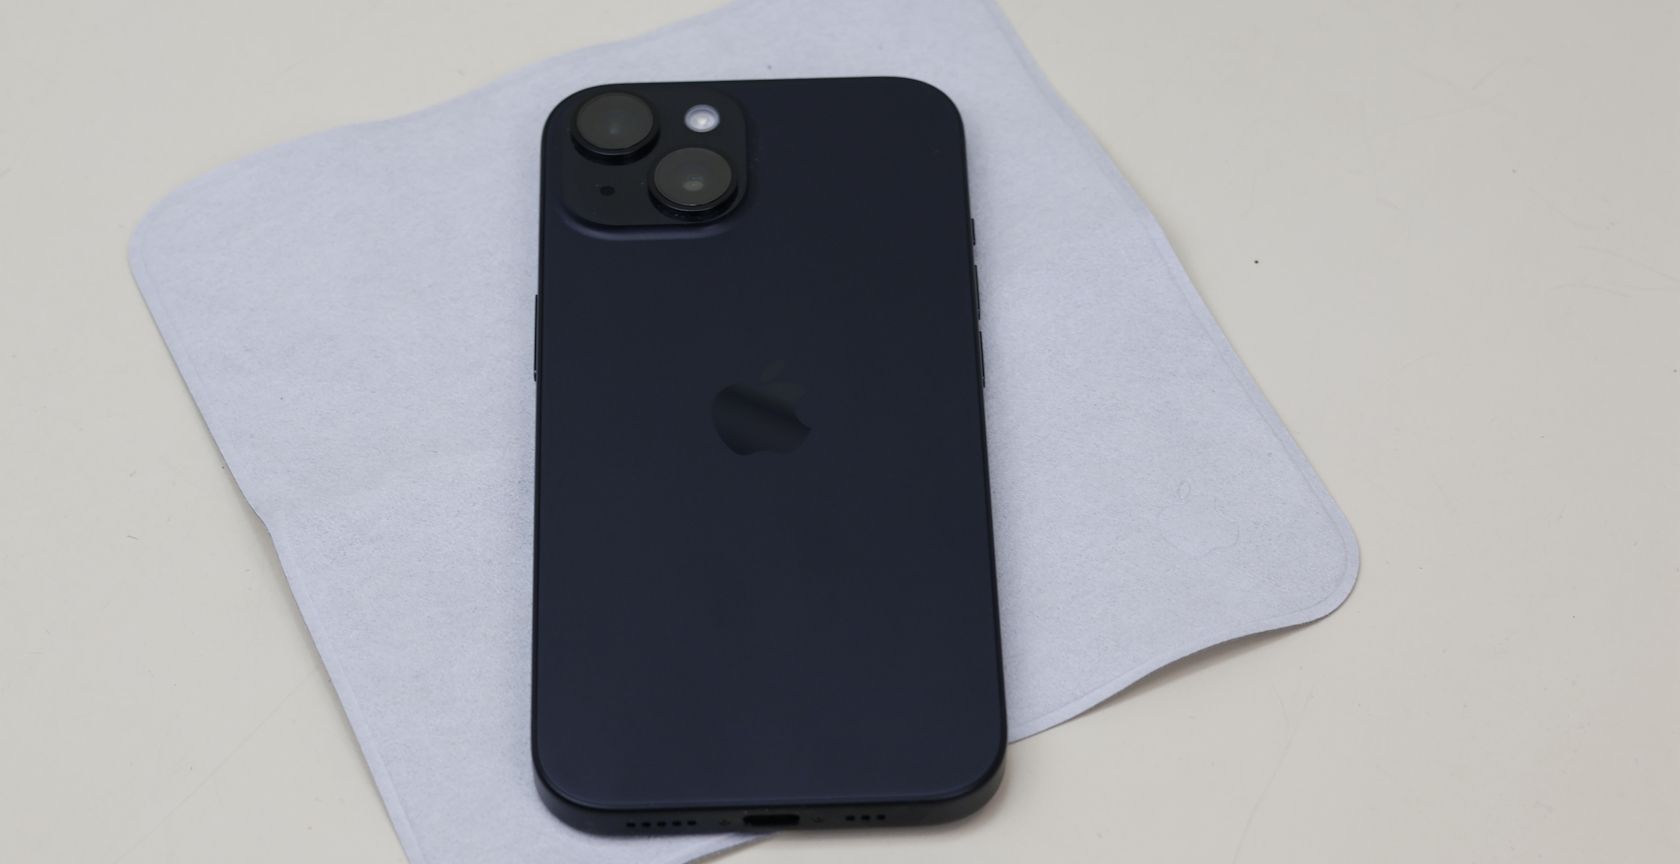 iPhone 12 on top of a lint-free cloth